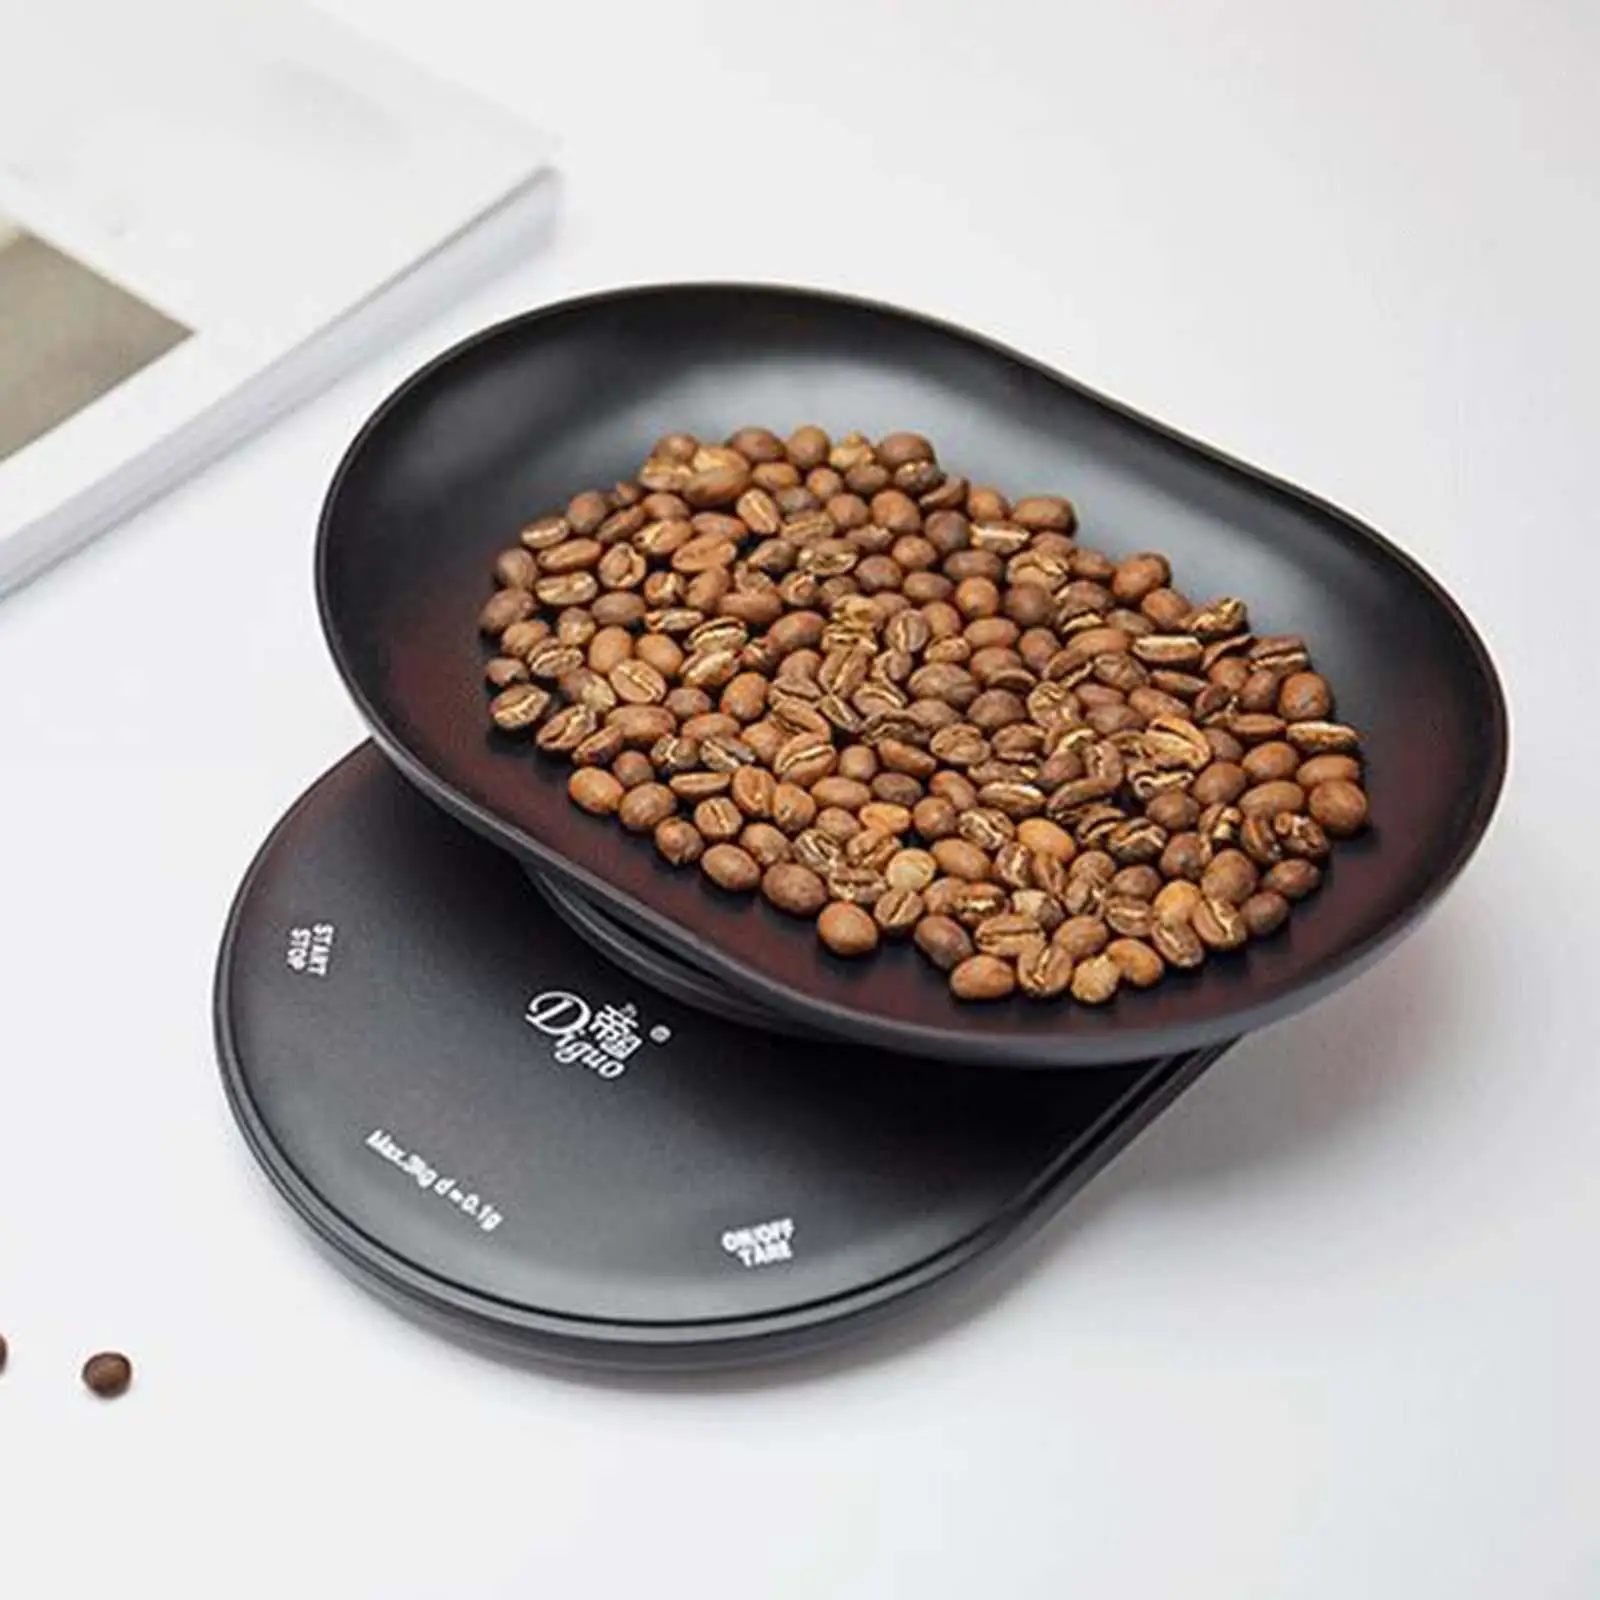 Portable Drip Espresso Scale with Back Lit LED Display 3 kg/3000G Household High Precision Measuring Tools Digital Coffee Scale